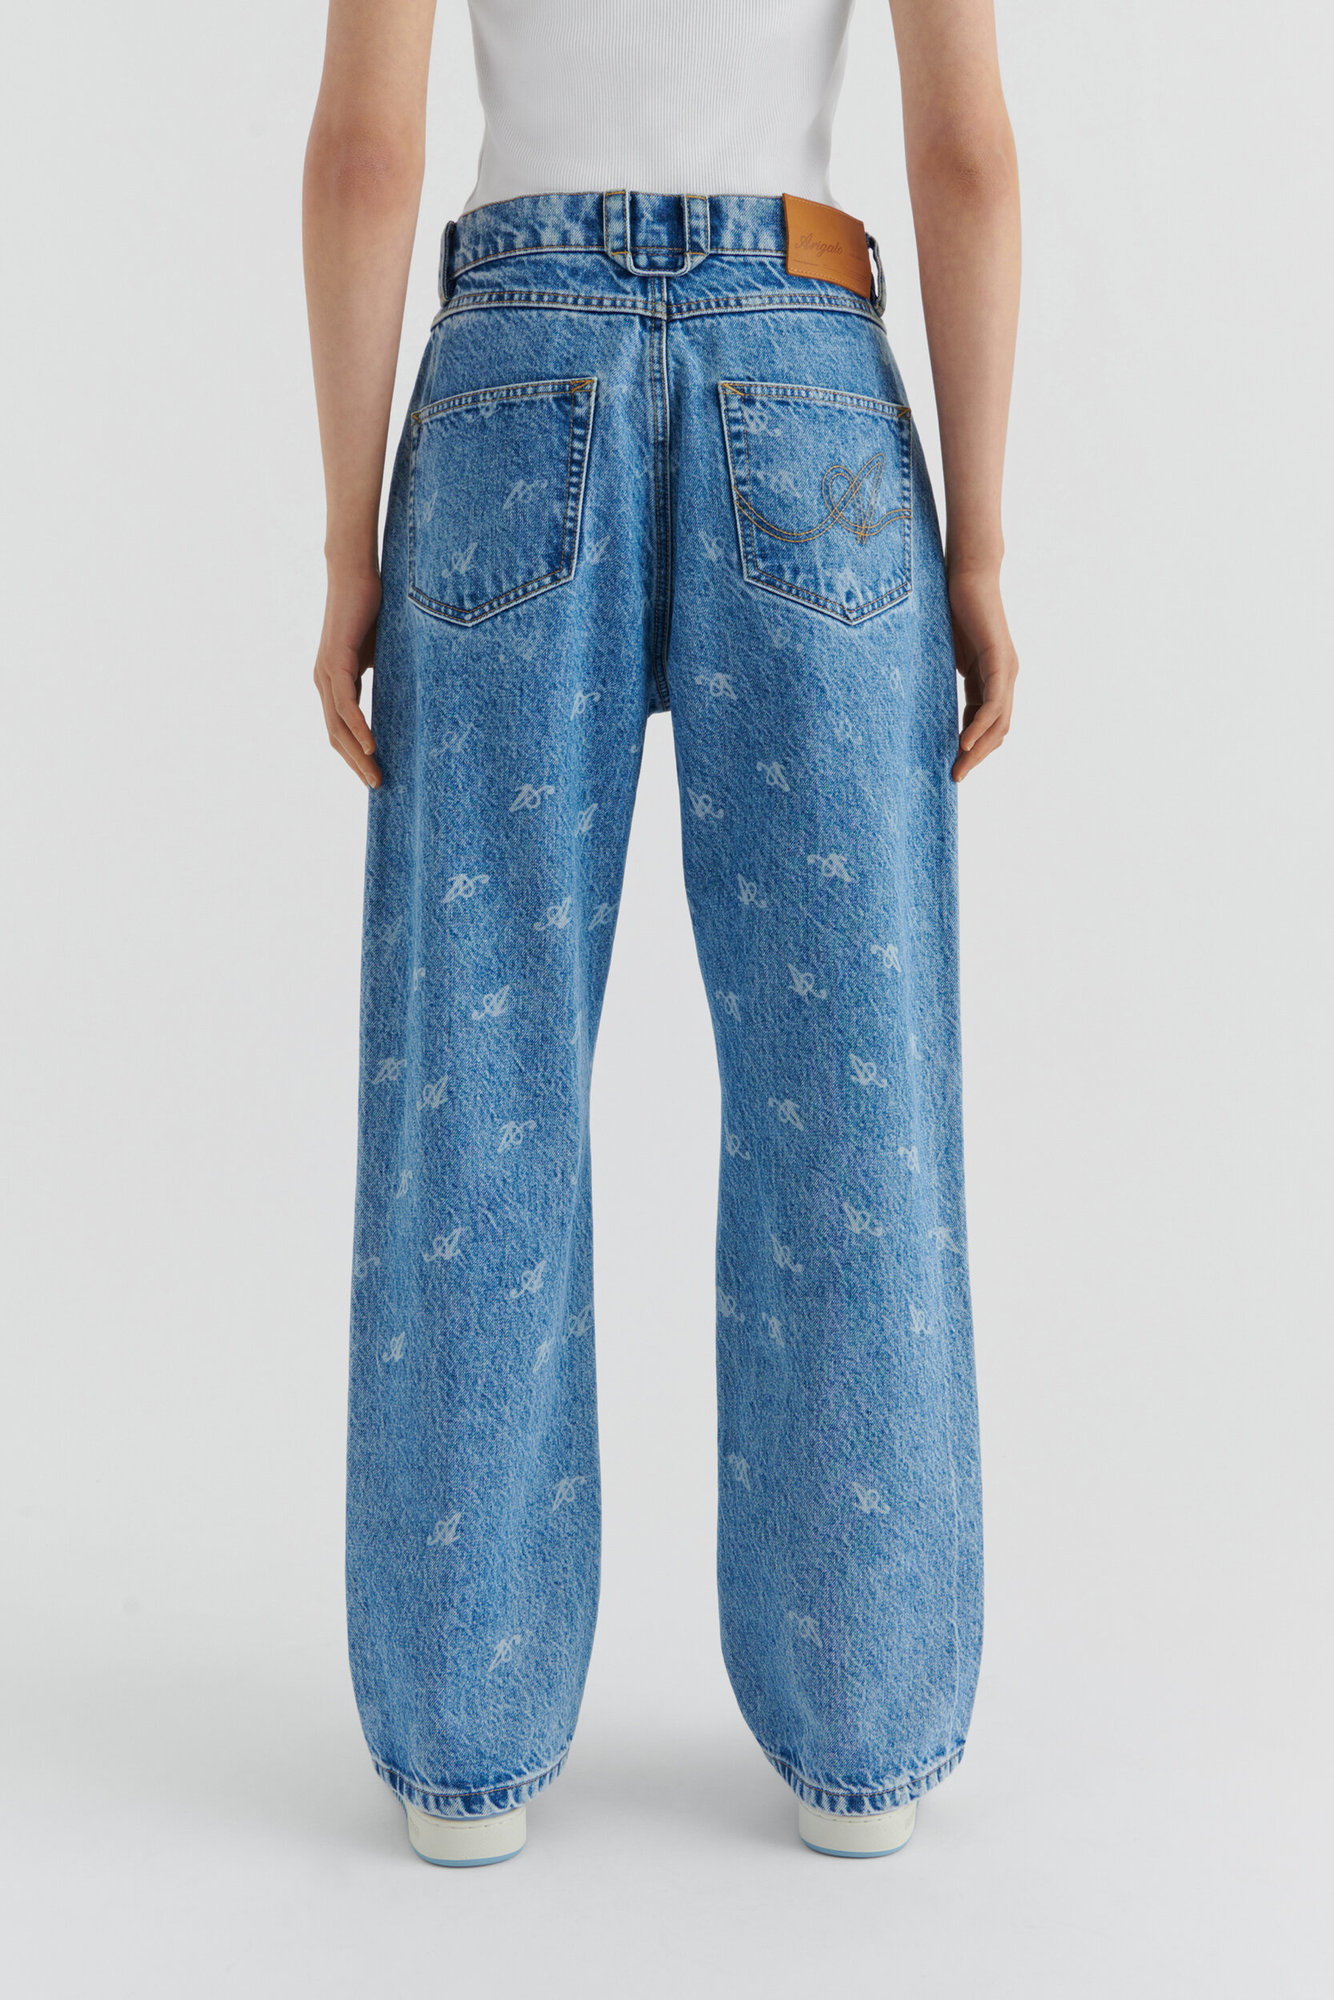 Faded Signature Sly Jeans